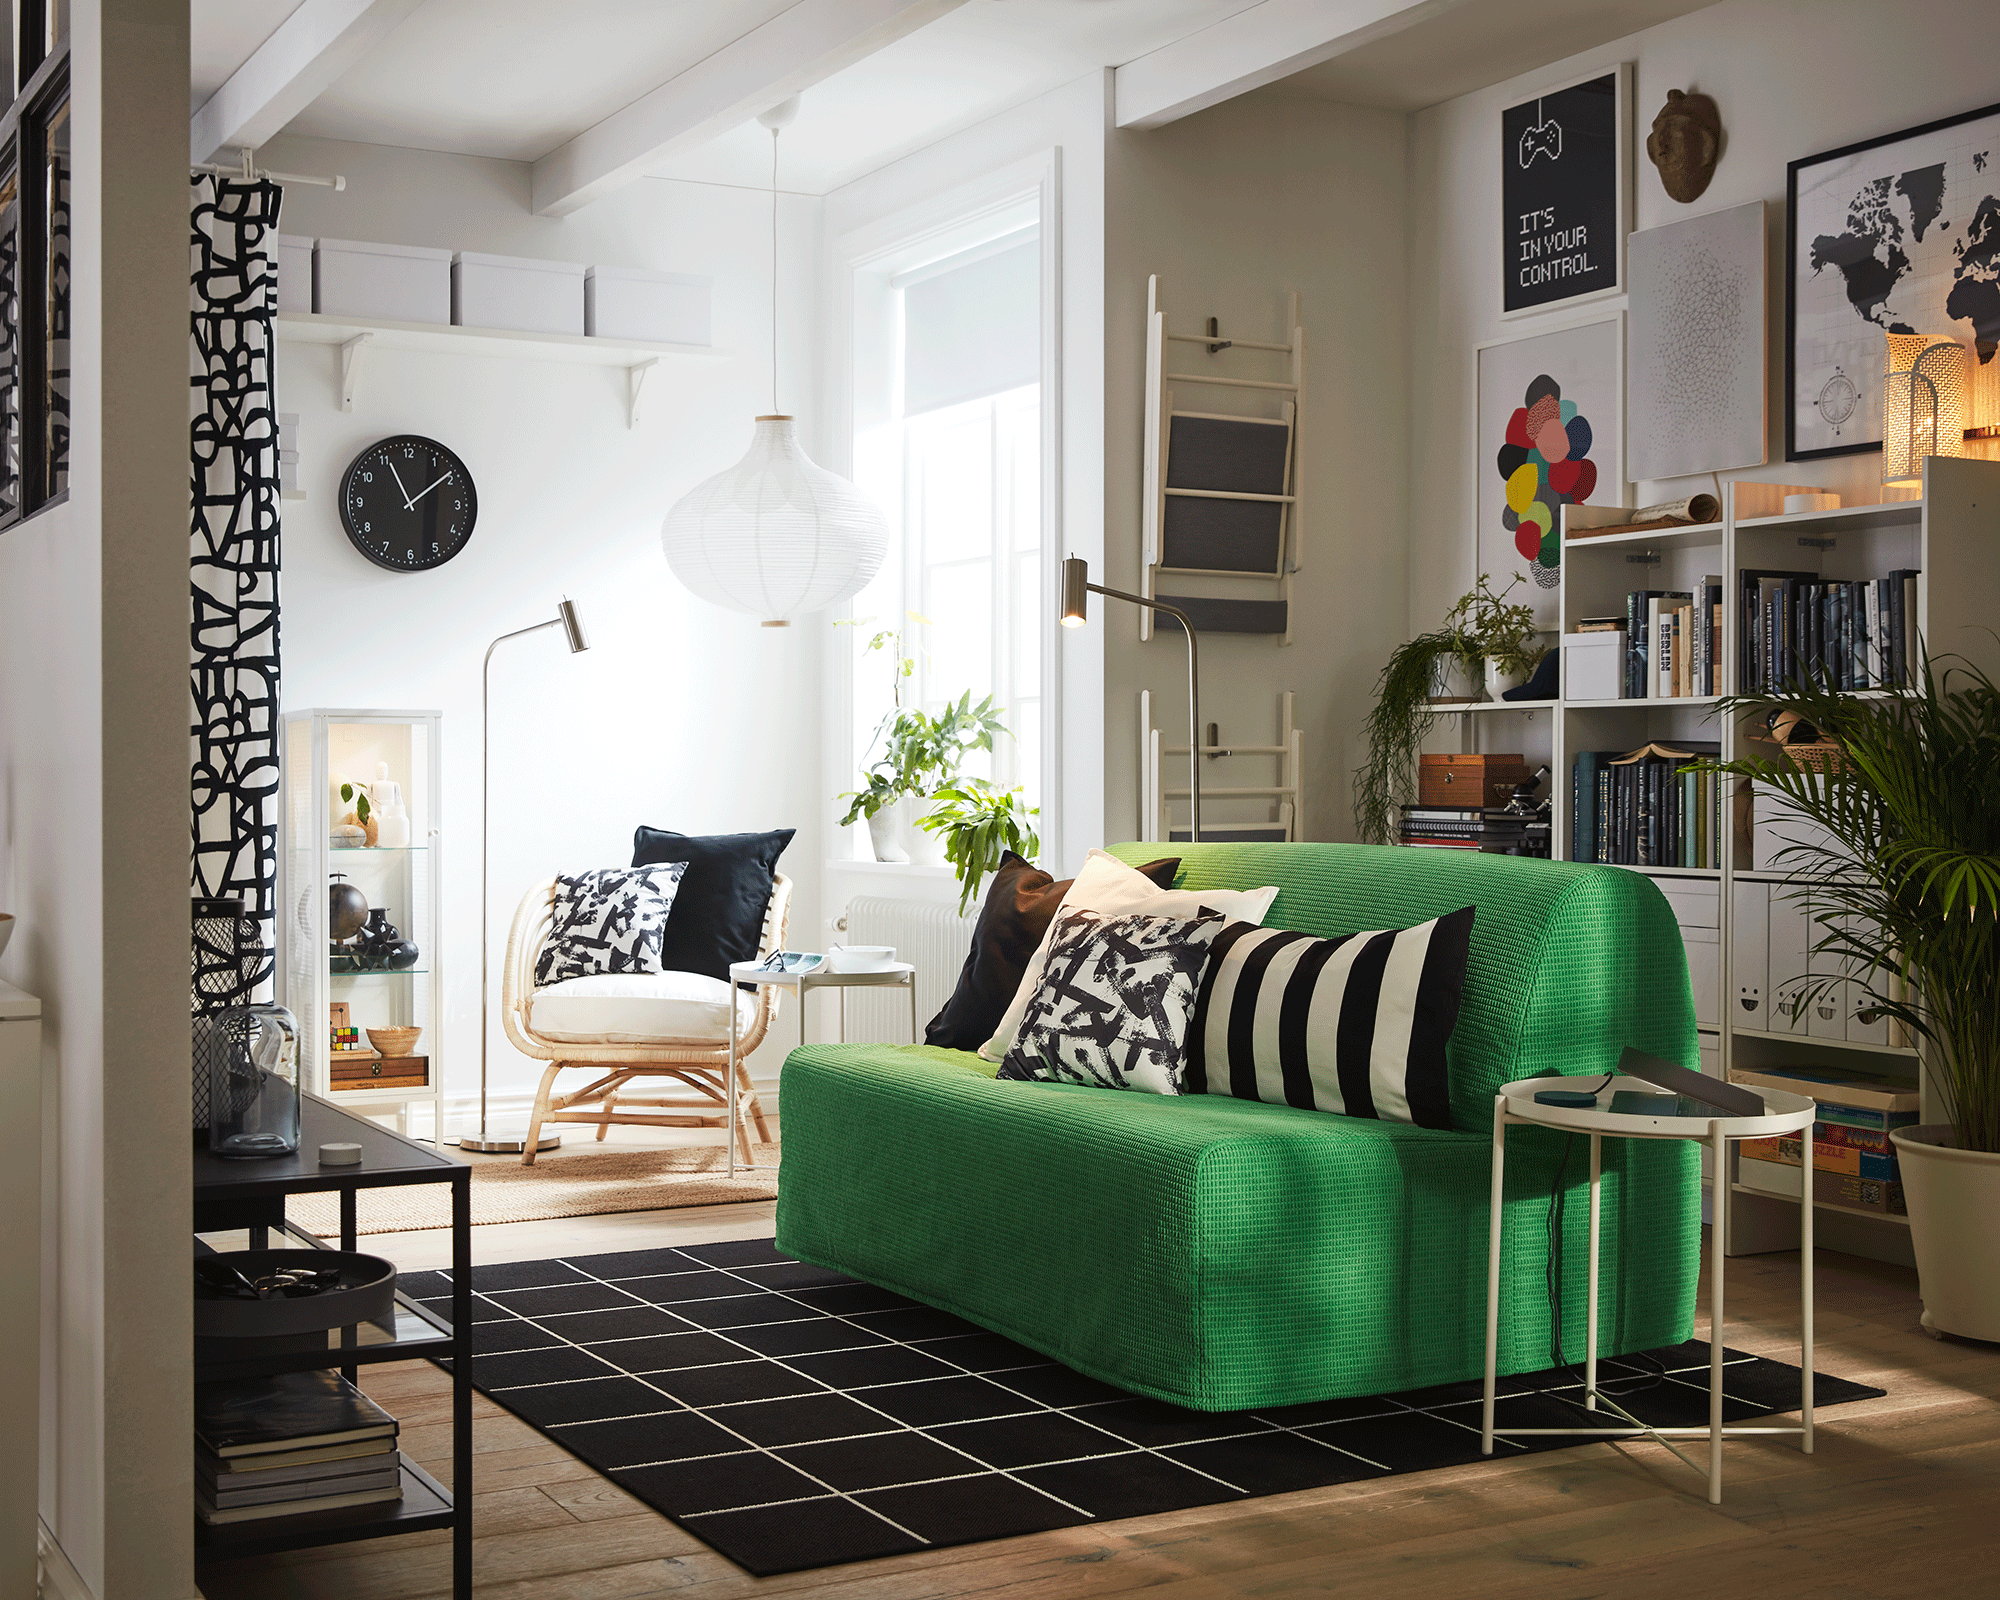 A small lounge with green sofa bed decor, round side table and monochrome area rug